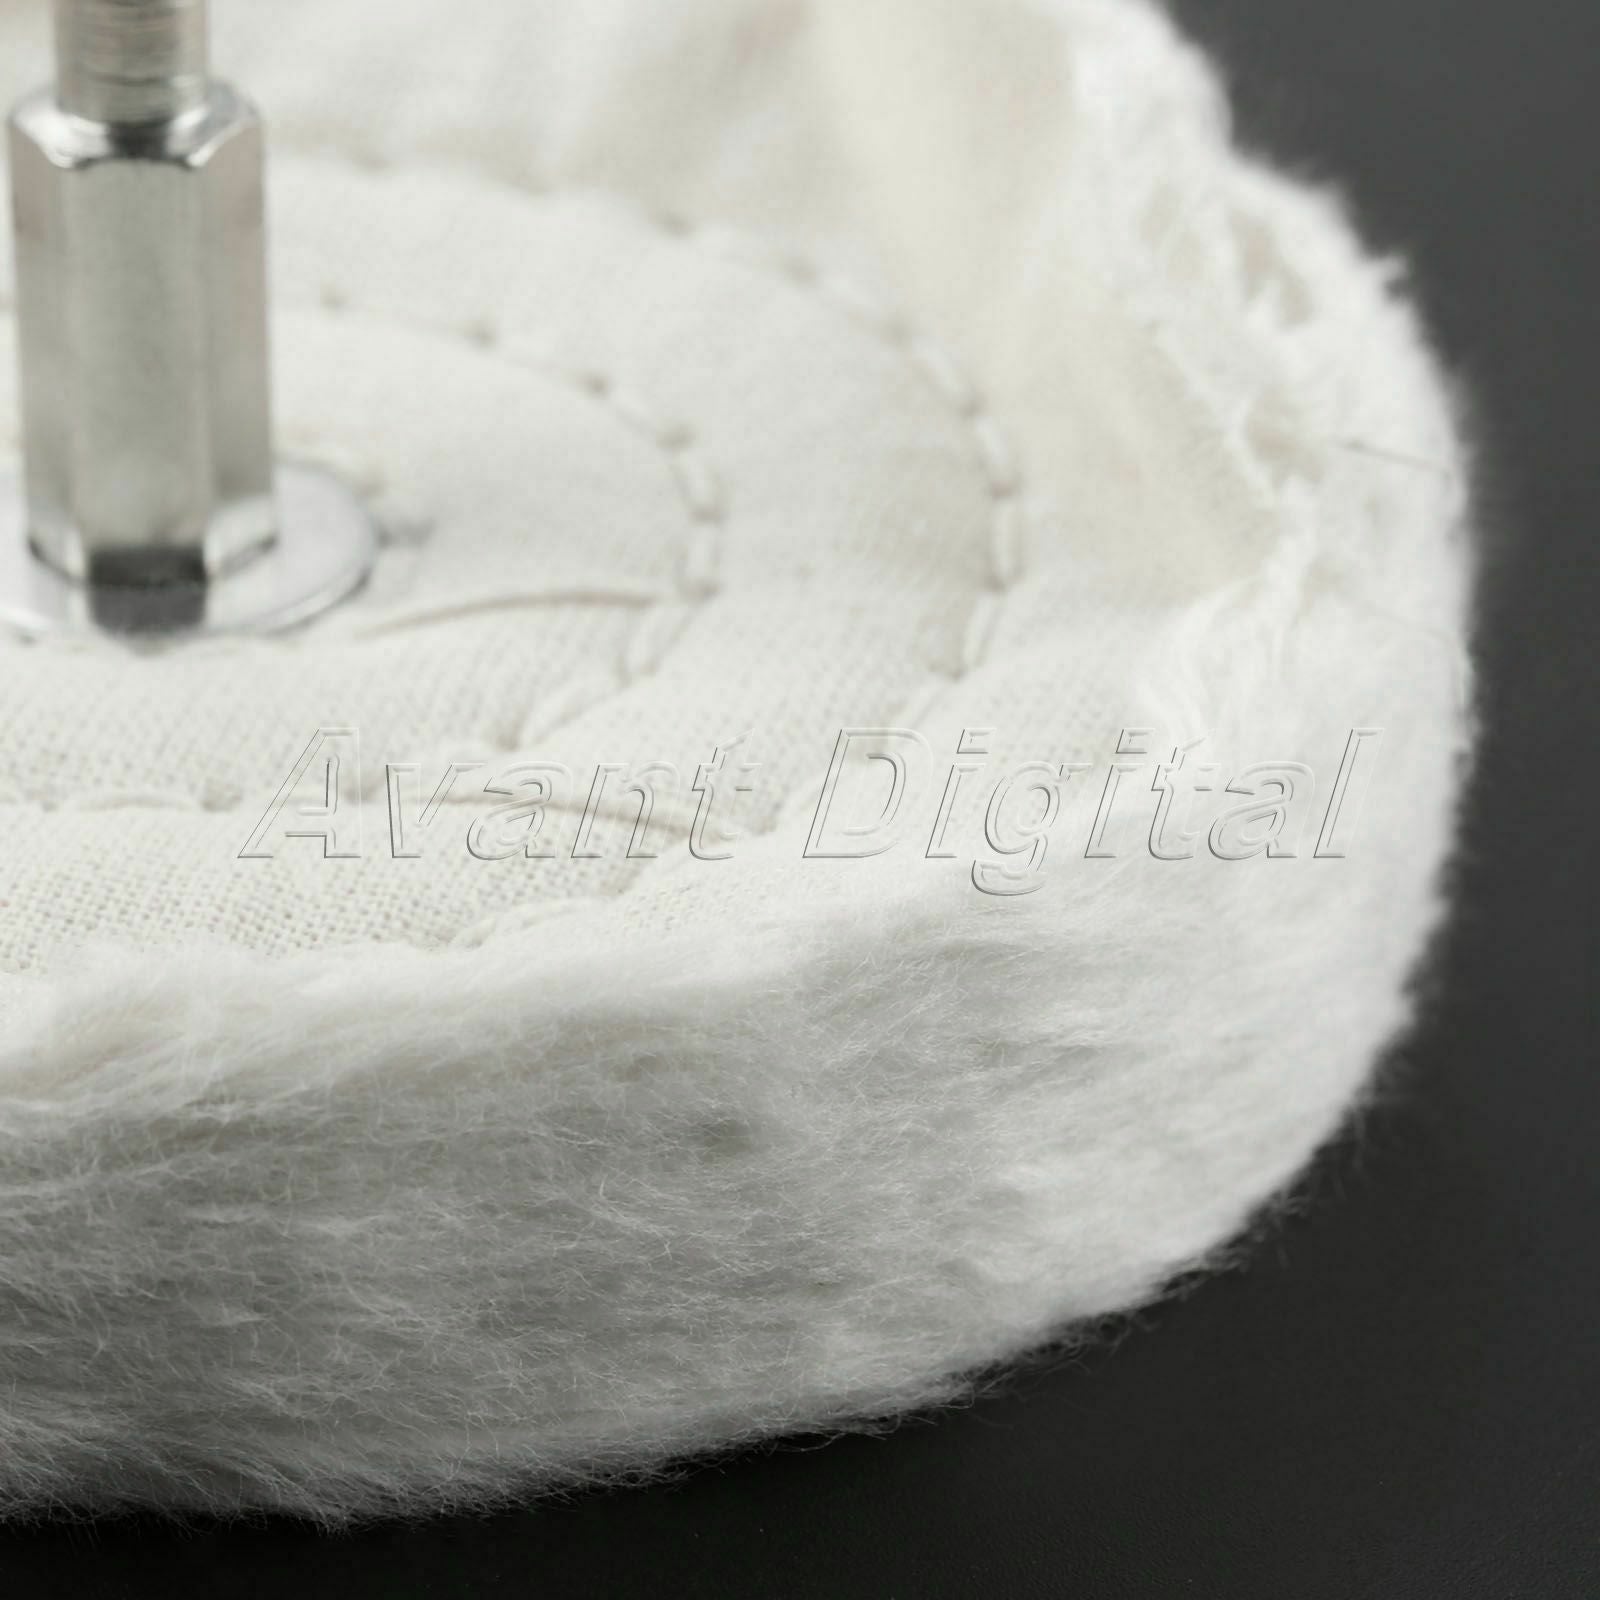 Round 4" Cloth Cleaning Buffing Wheel Pad Buffer Grinder Polishing Rotary Tool